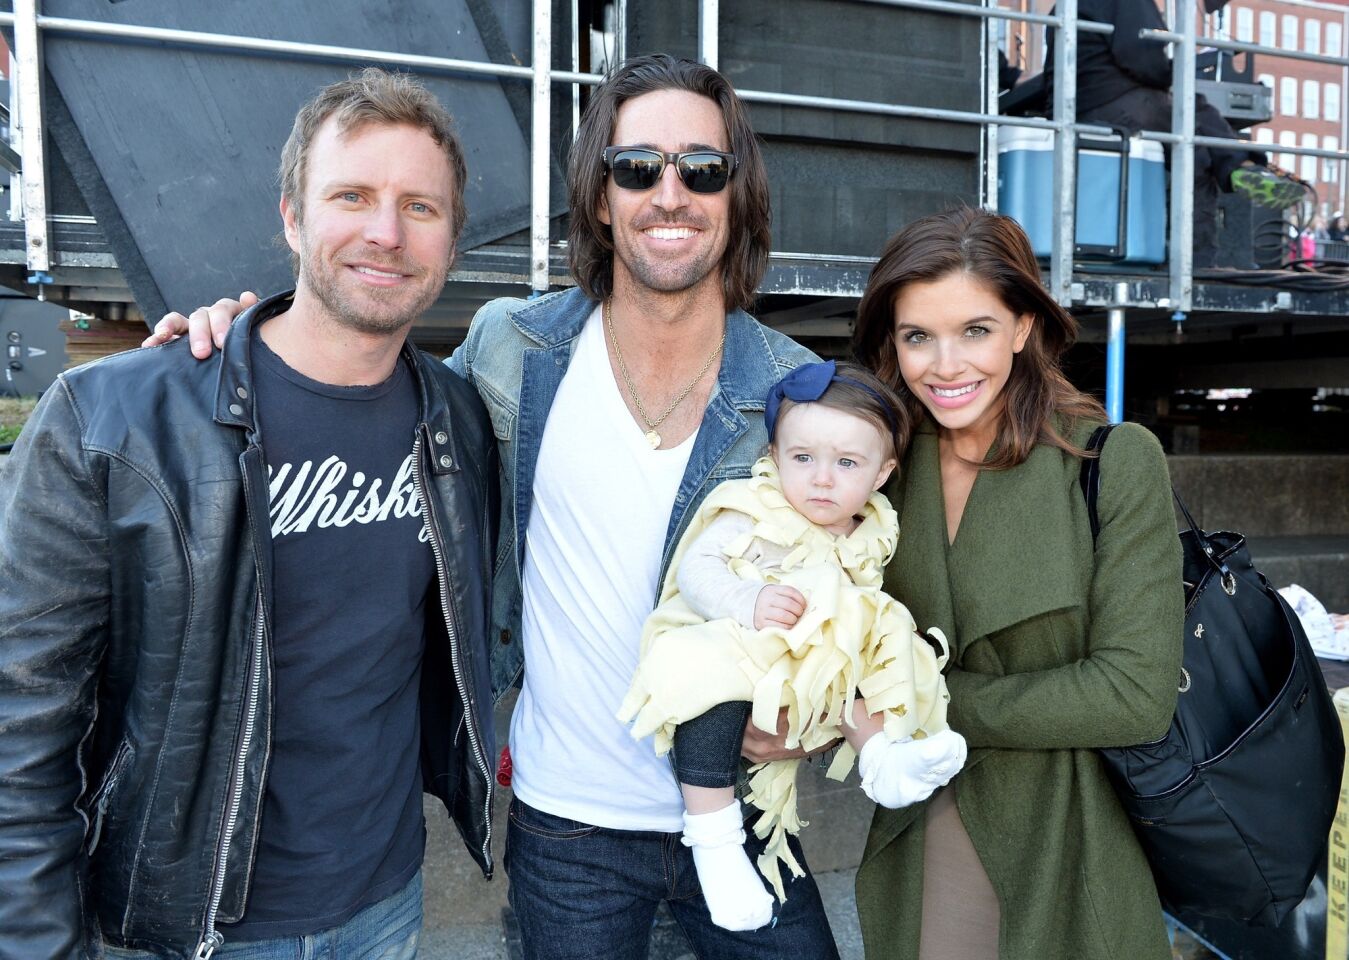 Dierks Bentley and his wife Cassidy Black became three-time parents in October 2013. They welcomed their first boy named Knox. "well... our boy knox is here! about to have the best tasting cold beer of my life! so proud of my wife. she rocked it. crazy stuff. #beerme," Bentley tweeted. The little boy will have sisters Evalyn Day, 5, and Jordan Catherine, 2, to look after him. His parents married in 2005.